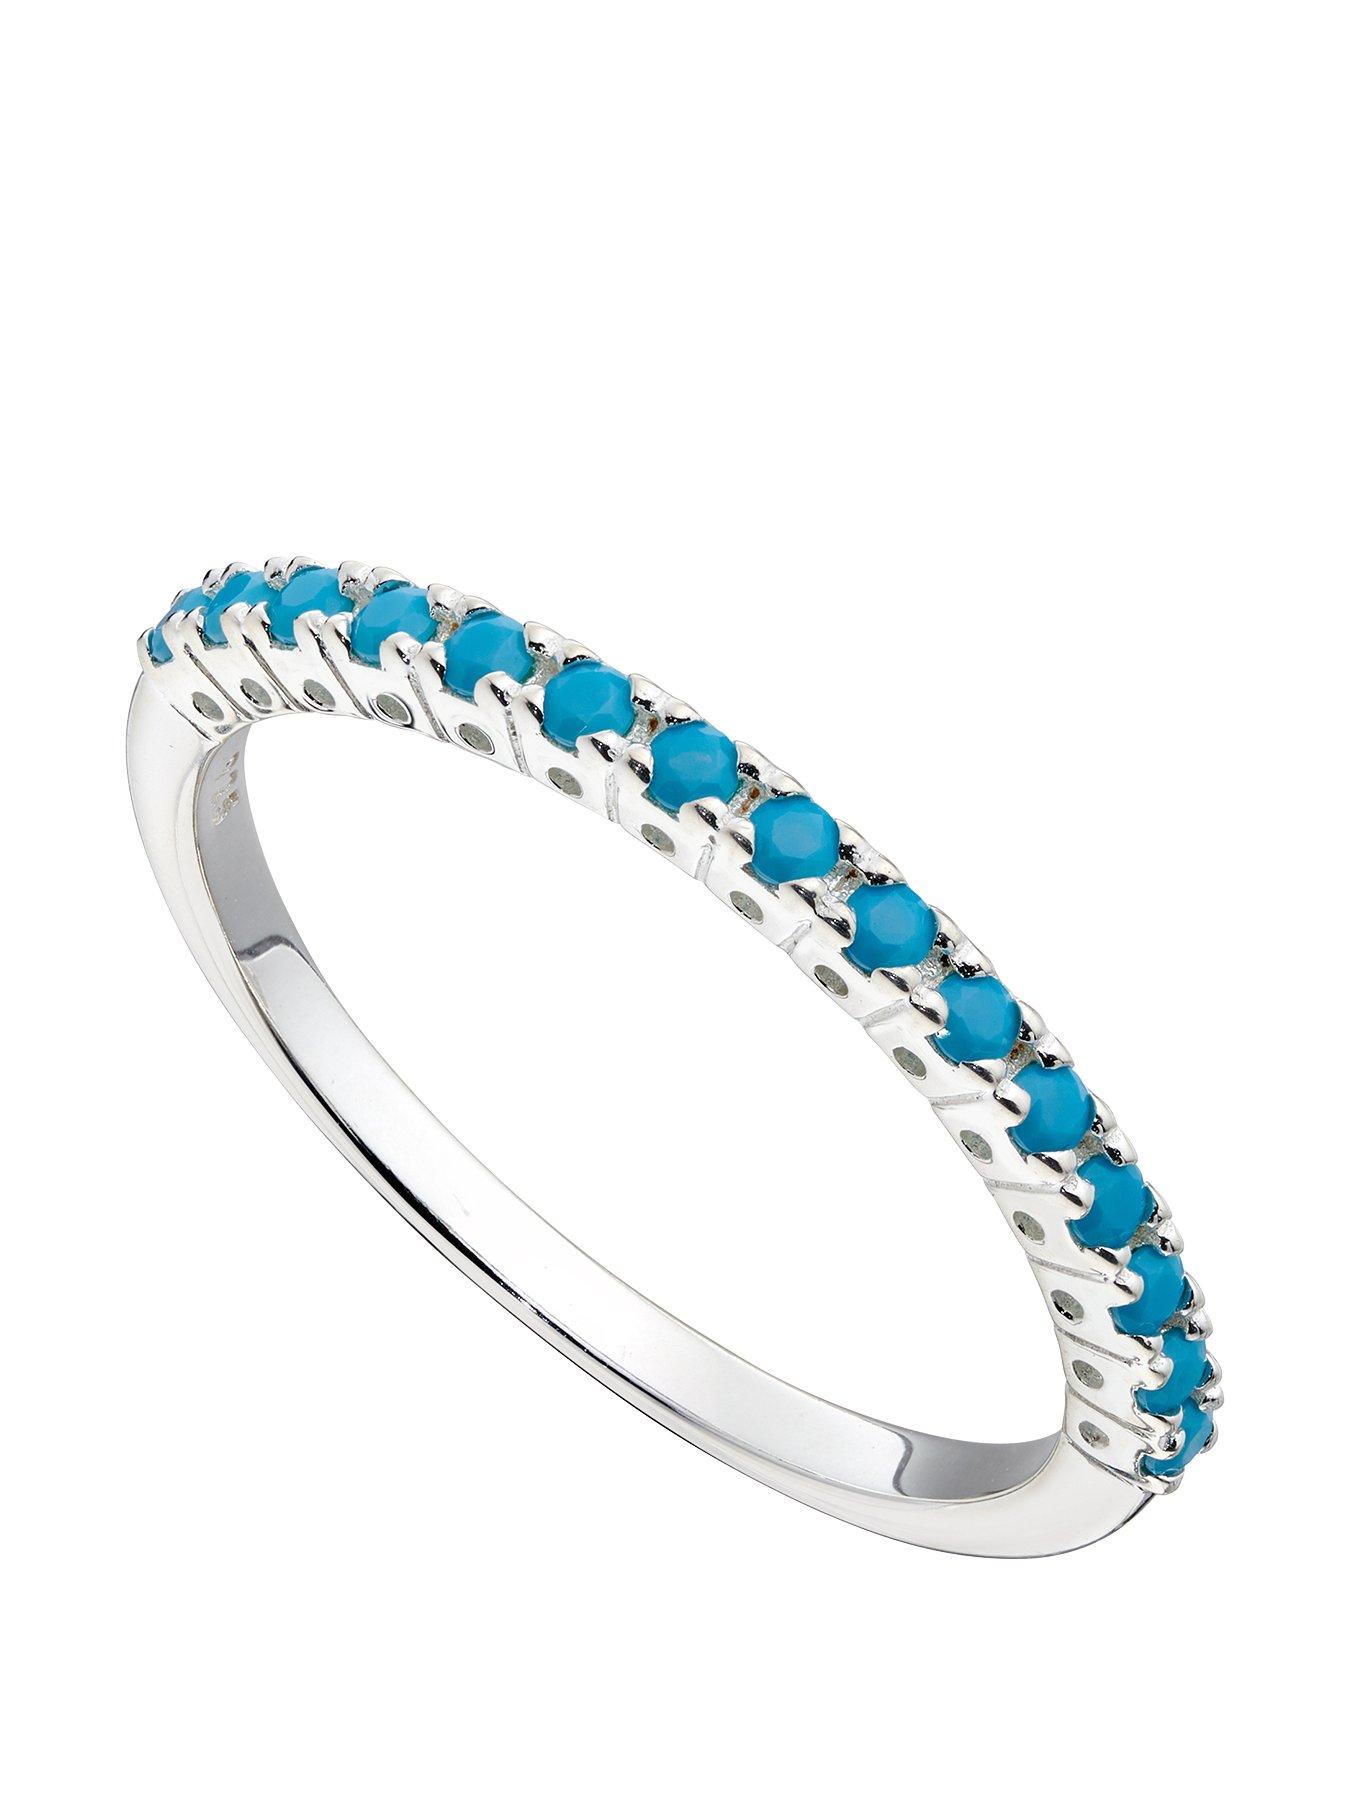 Jewellery & watches Sterling Silver & Turquoise Nano Crystal Stacking Ring